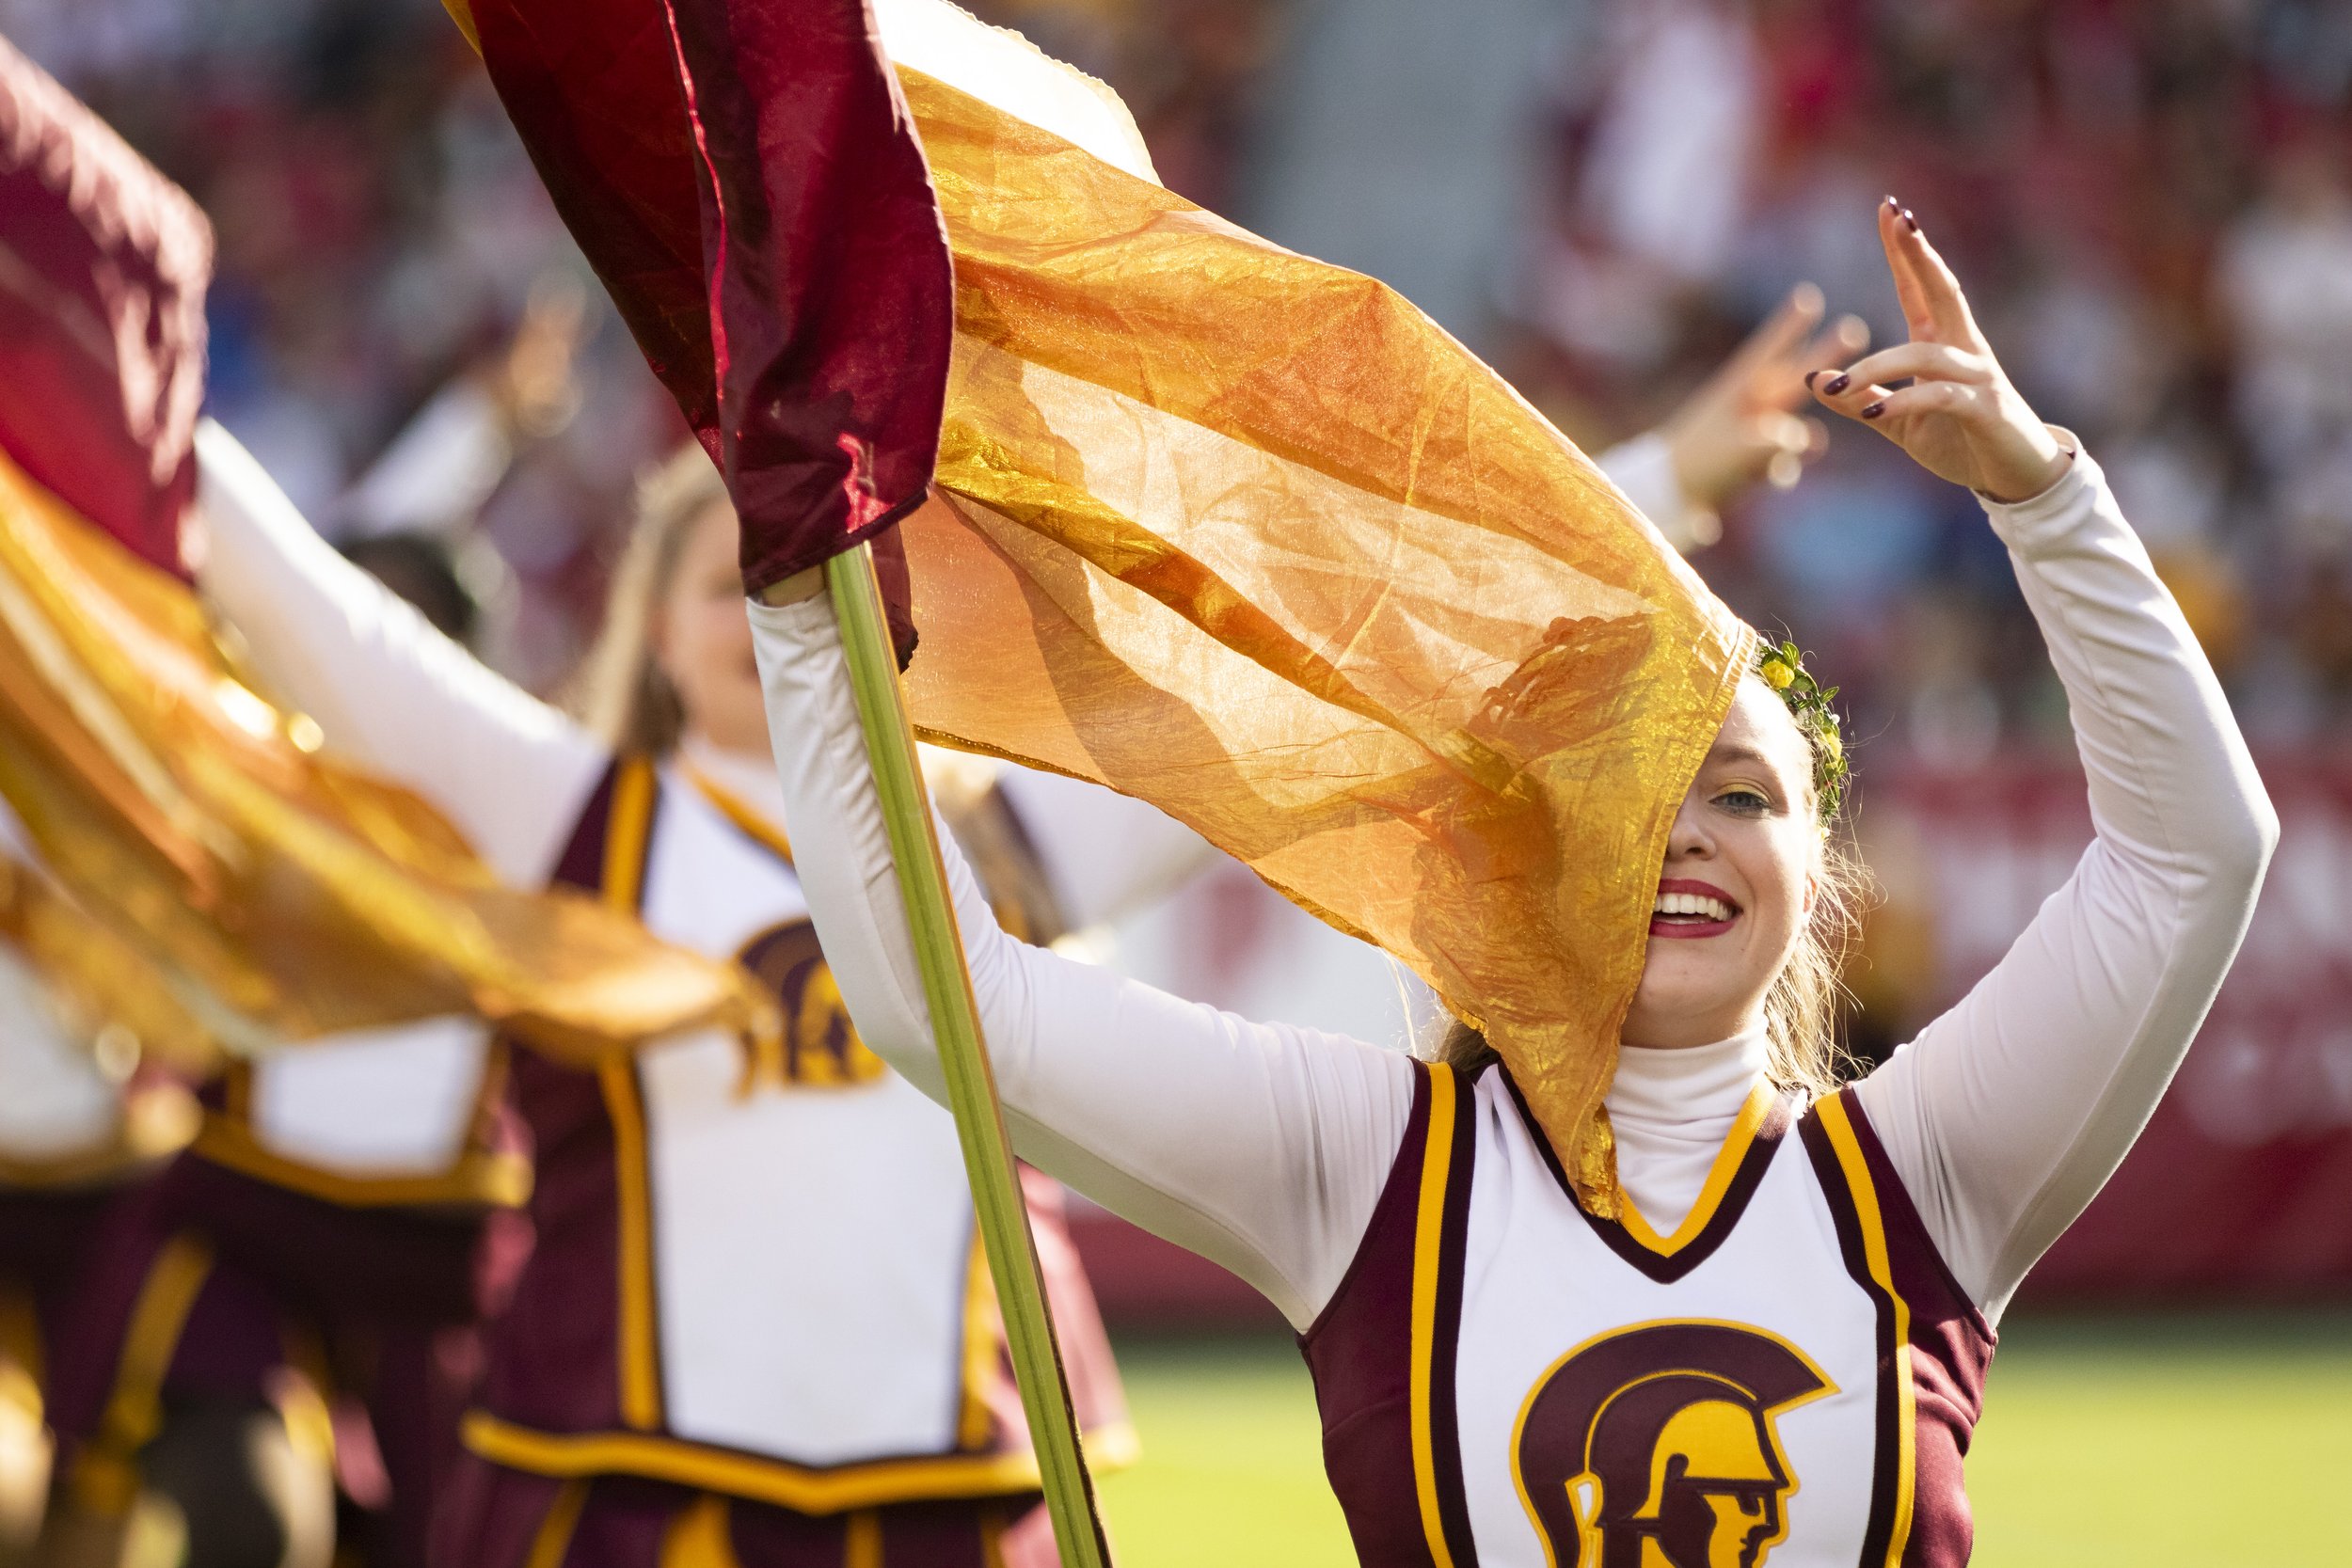  University of Southern California (USC) Trojans Marching Band performing during half-time of a football game against the University of California, Los Angeles Bruins at the Los Angeles Memorial Coliseum, in Los Angeles, Calif., on Saturday, Nov. 18,